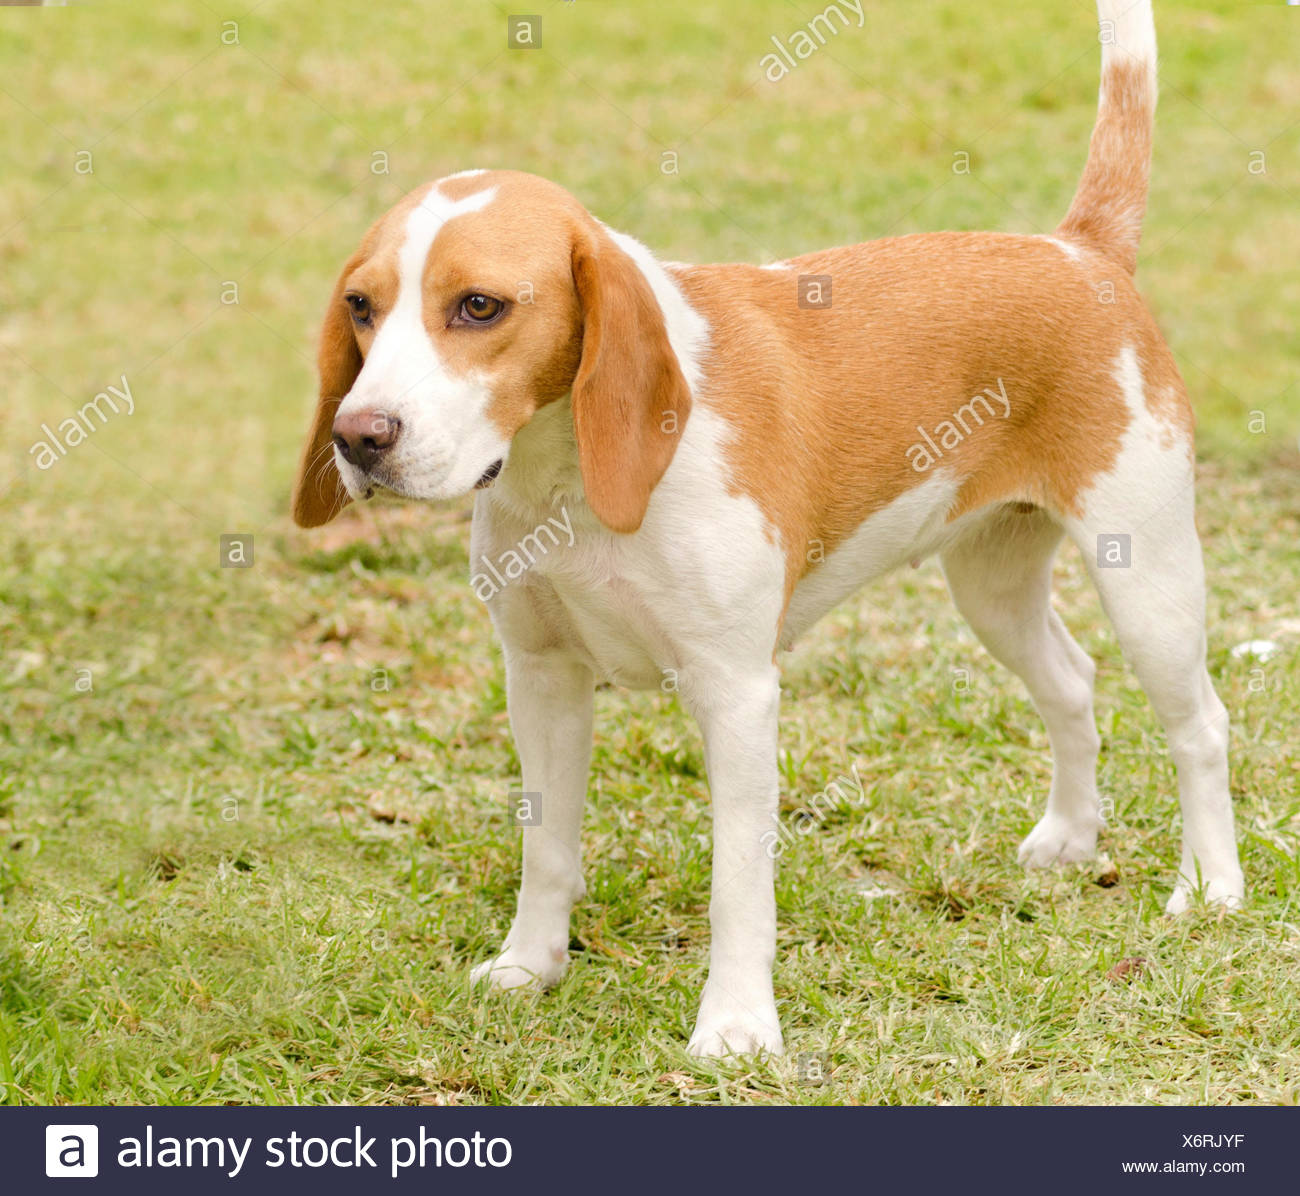 A Young Beautiful White And Orange Istrian Shorthaired Hound Puppy Dog Standing On The Lawn The Istrian Short Haired Hound Is A Scent Hound Dog For Hunting Hare And Foxes Stock Photo